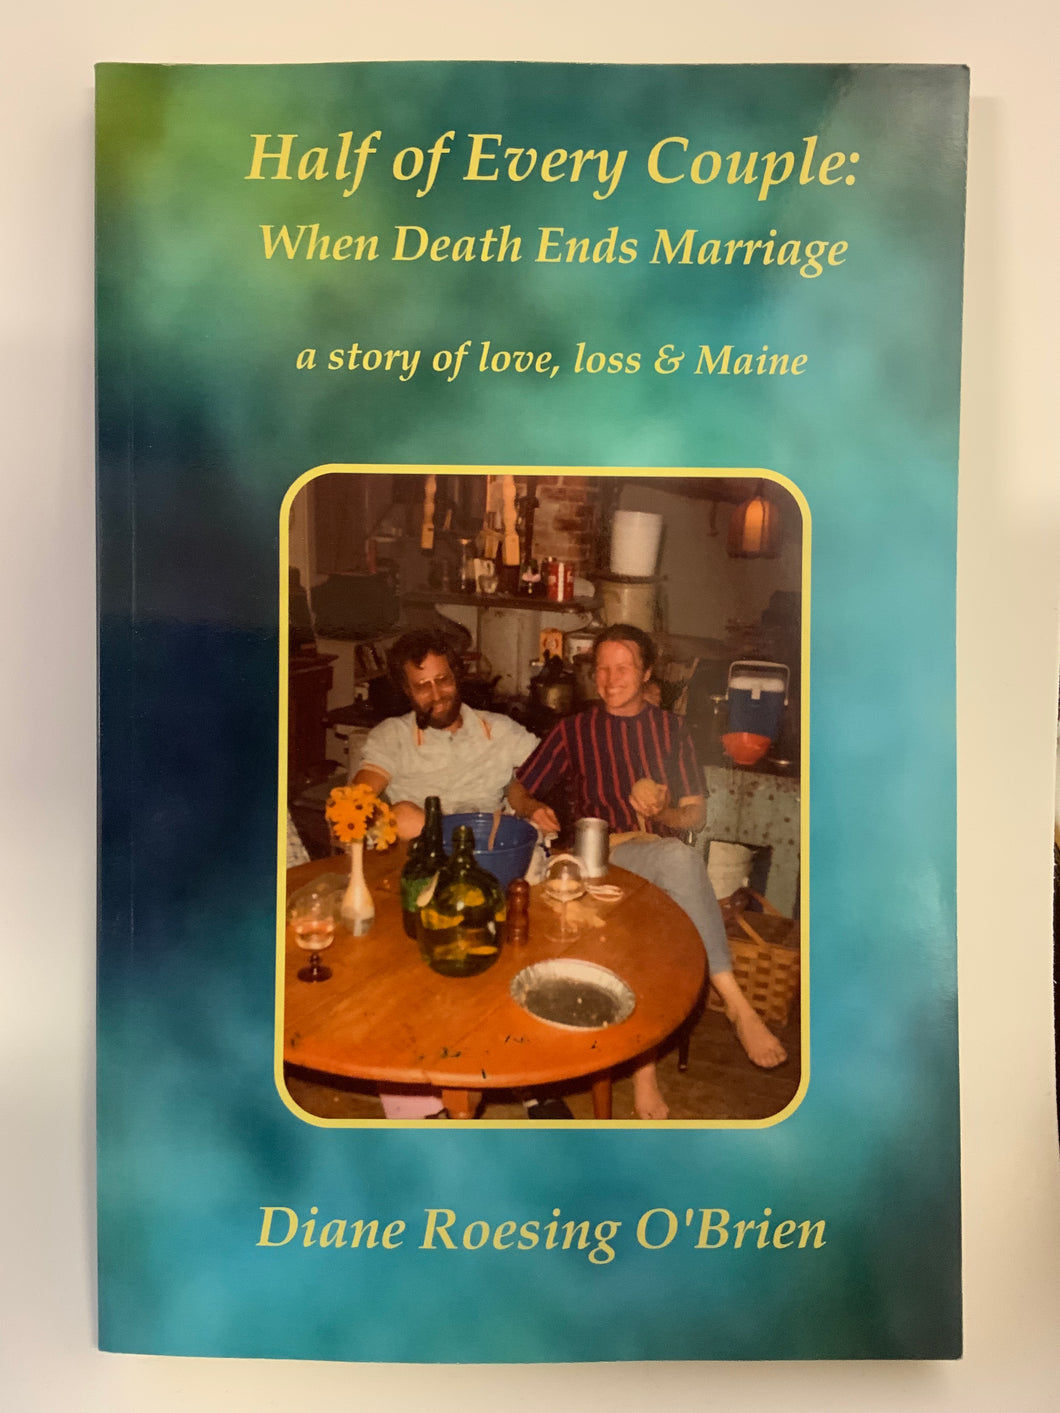 Half of Every Couple: When Death Ends Marriage